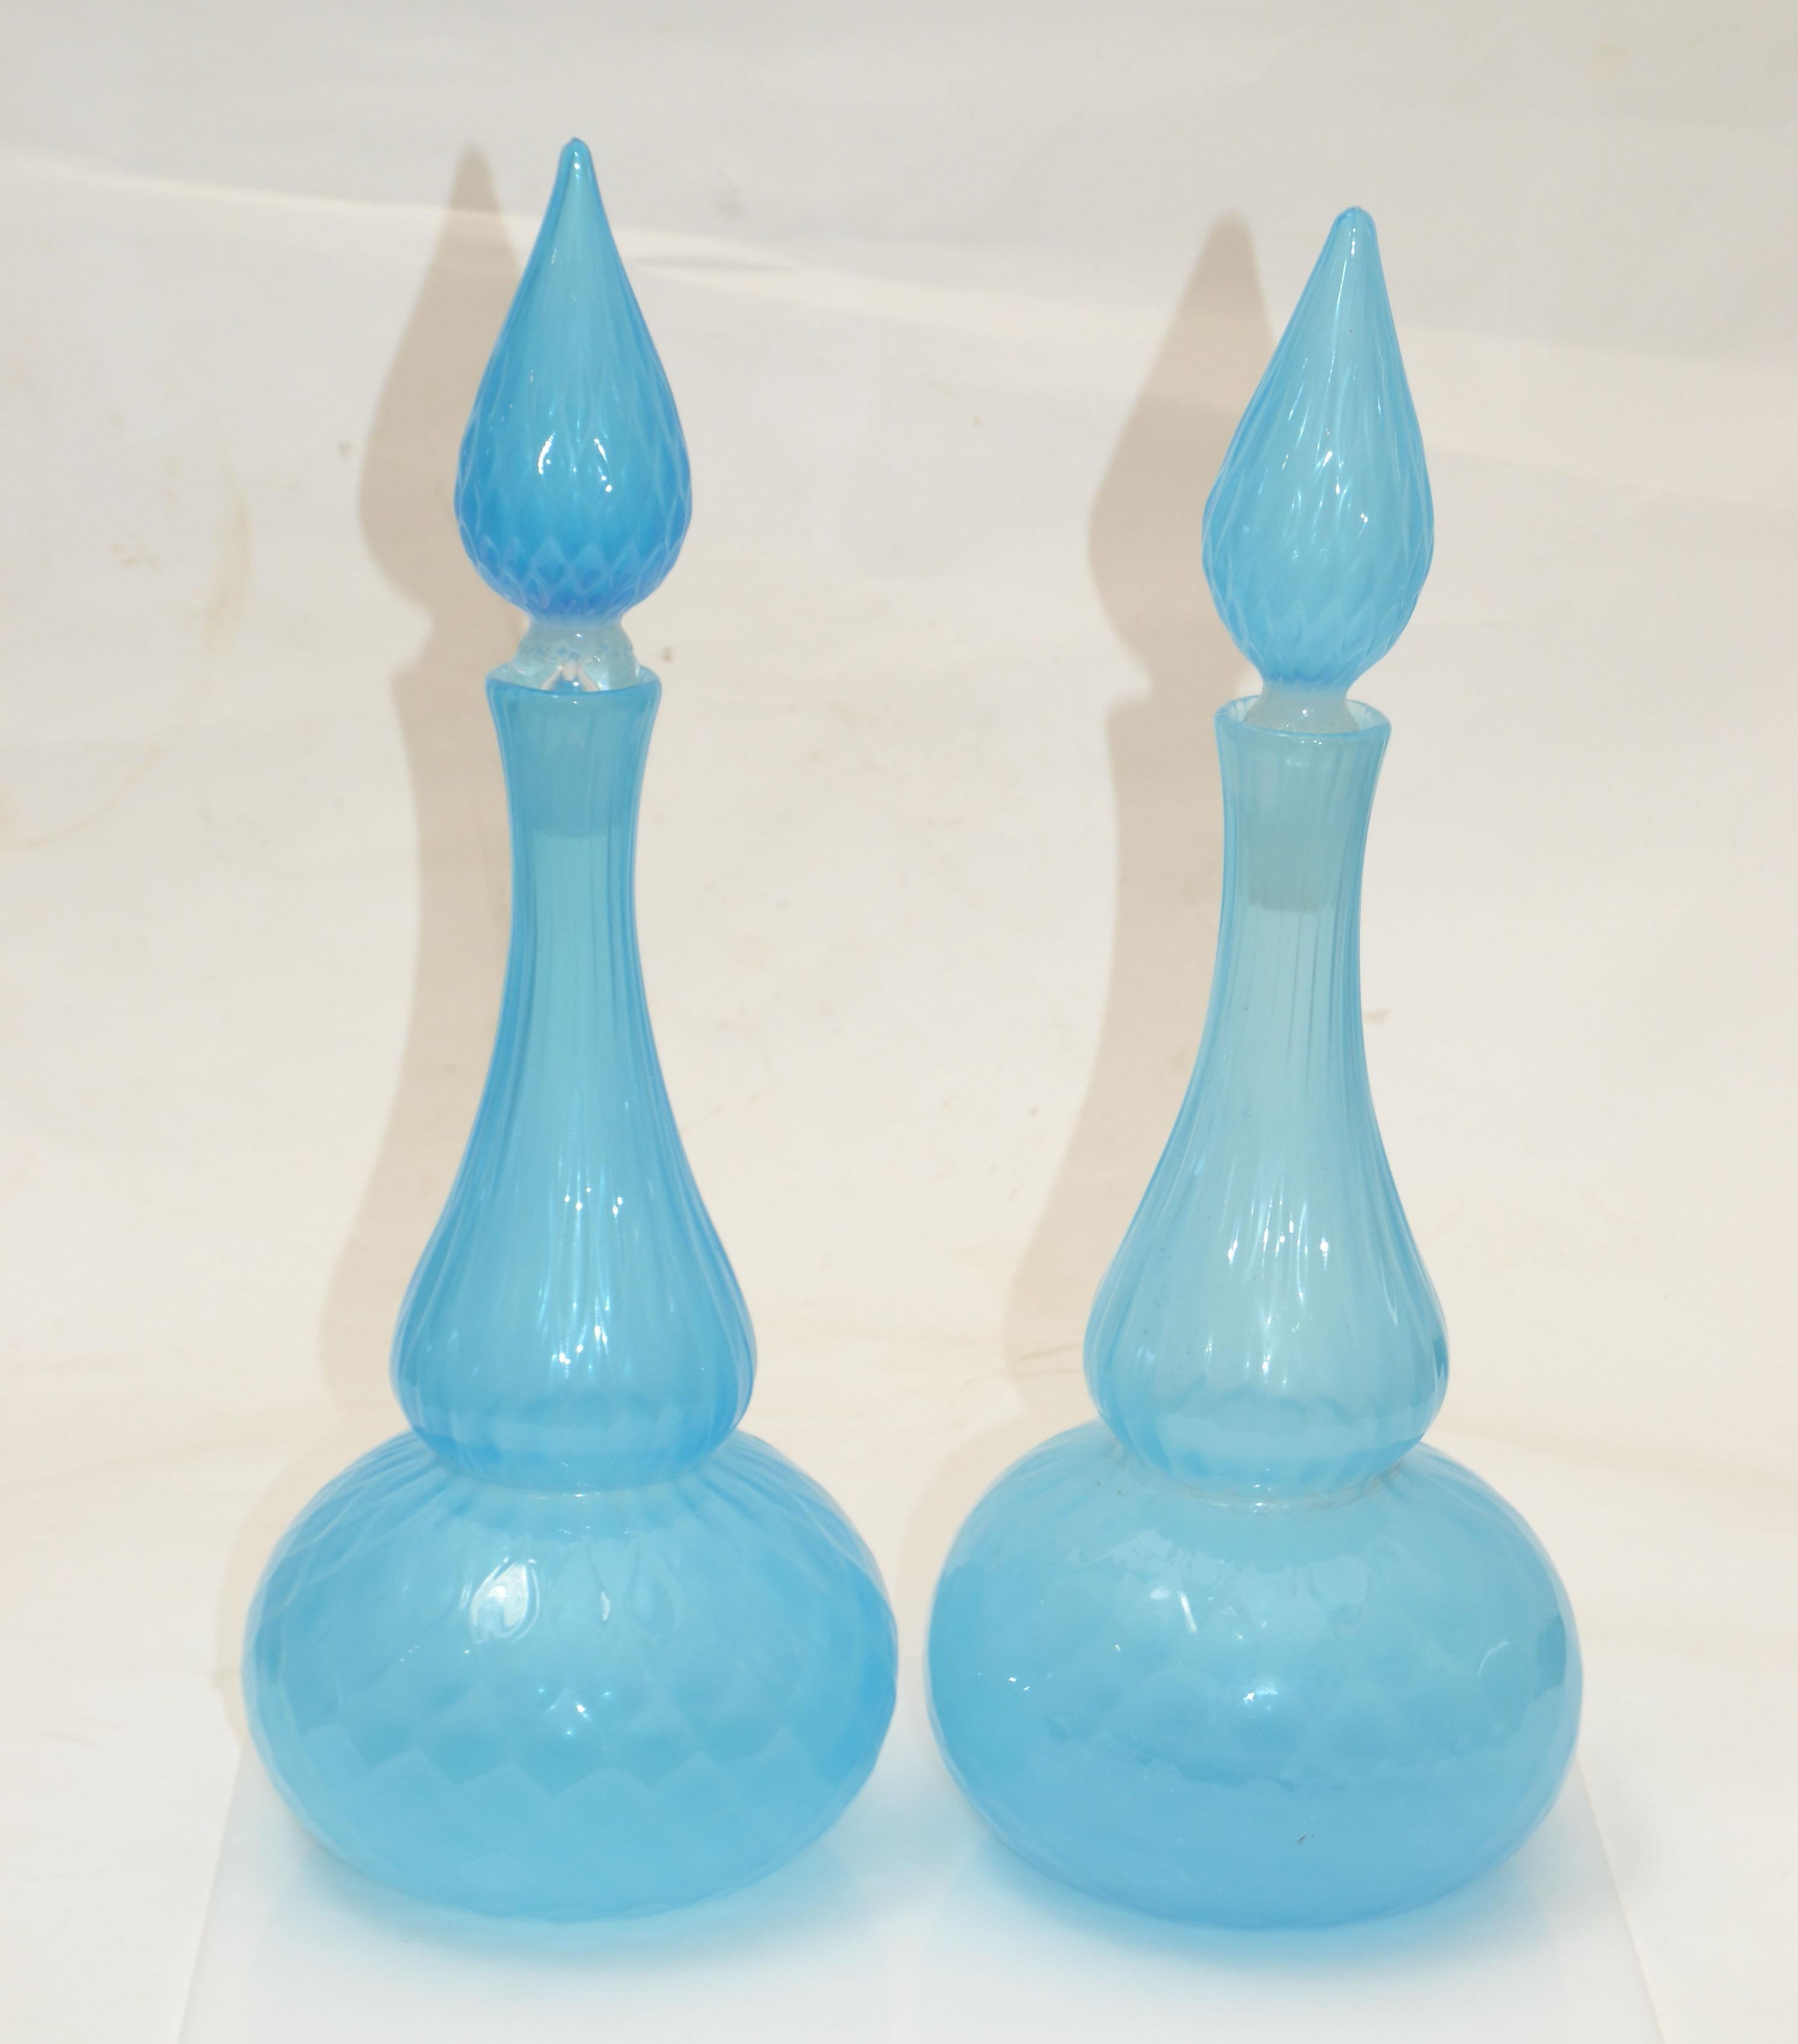 Barbini Murano Faceted Light Blue Art Glass Vessel Decanter With Stopper, Pair For Sale 6